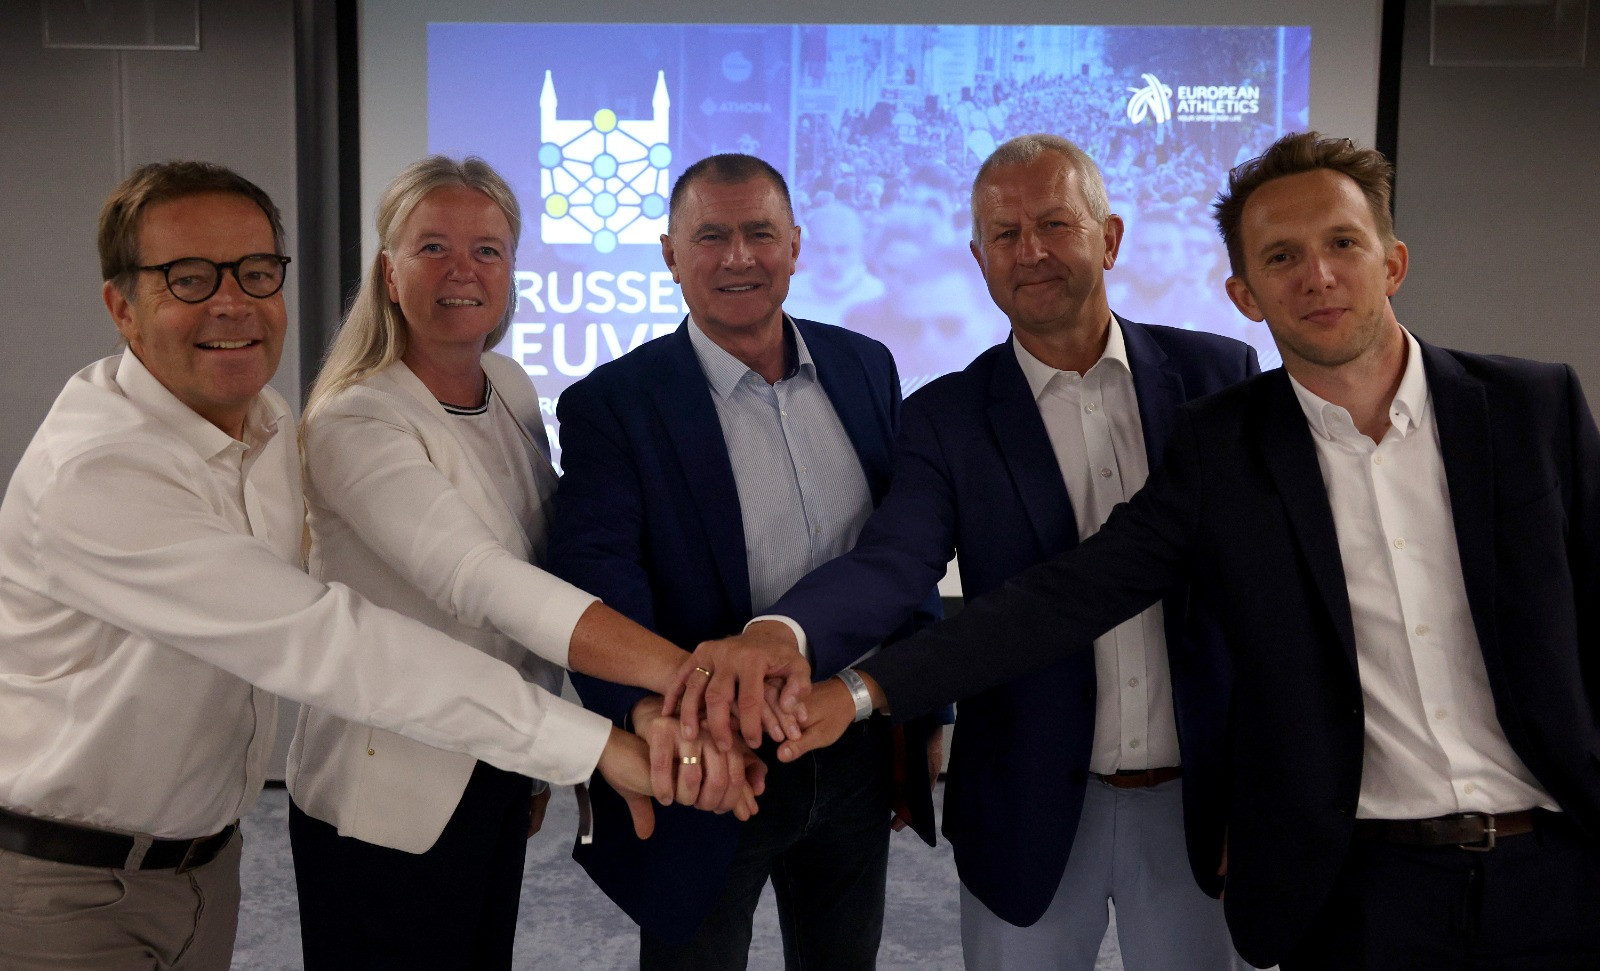 Inaugural European Running Championships to be held at Brussels-Leuven in 2025